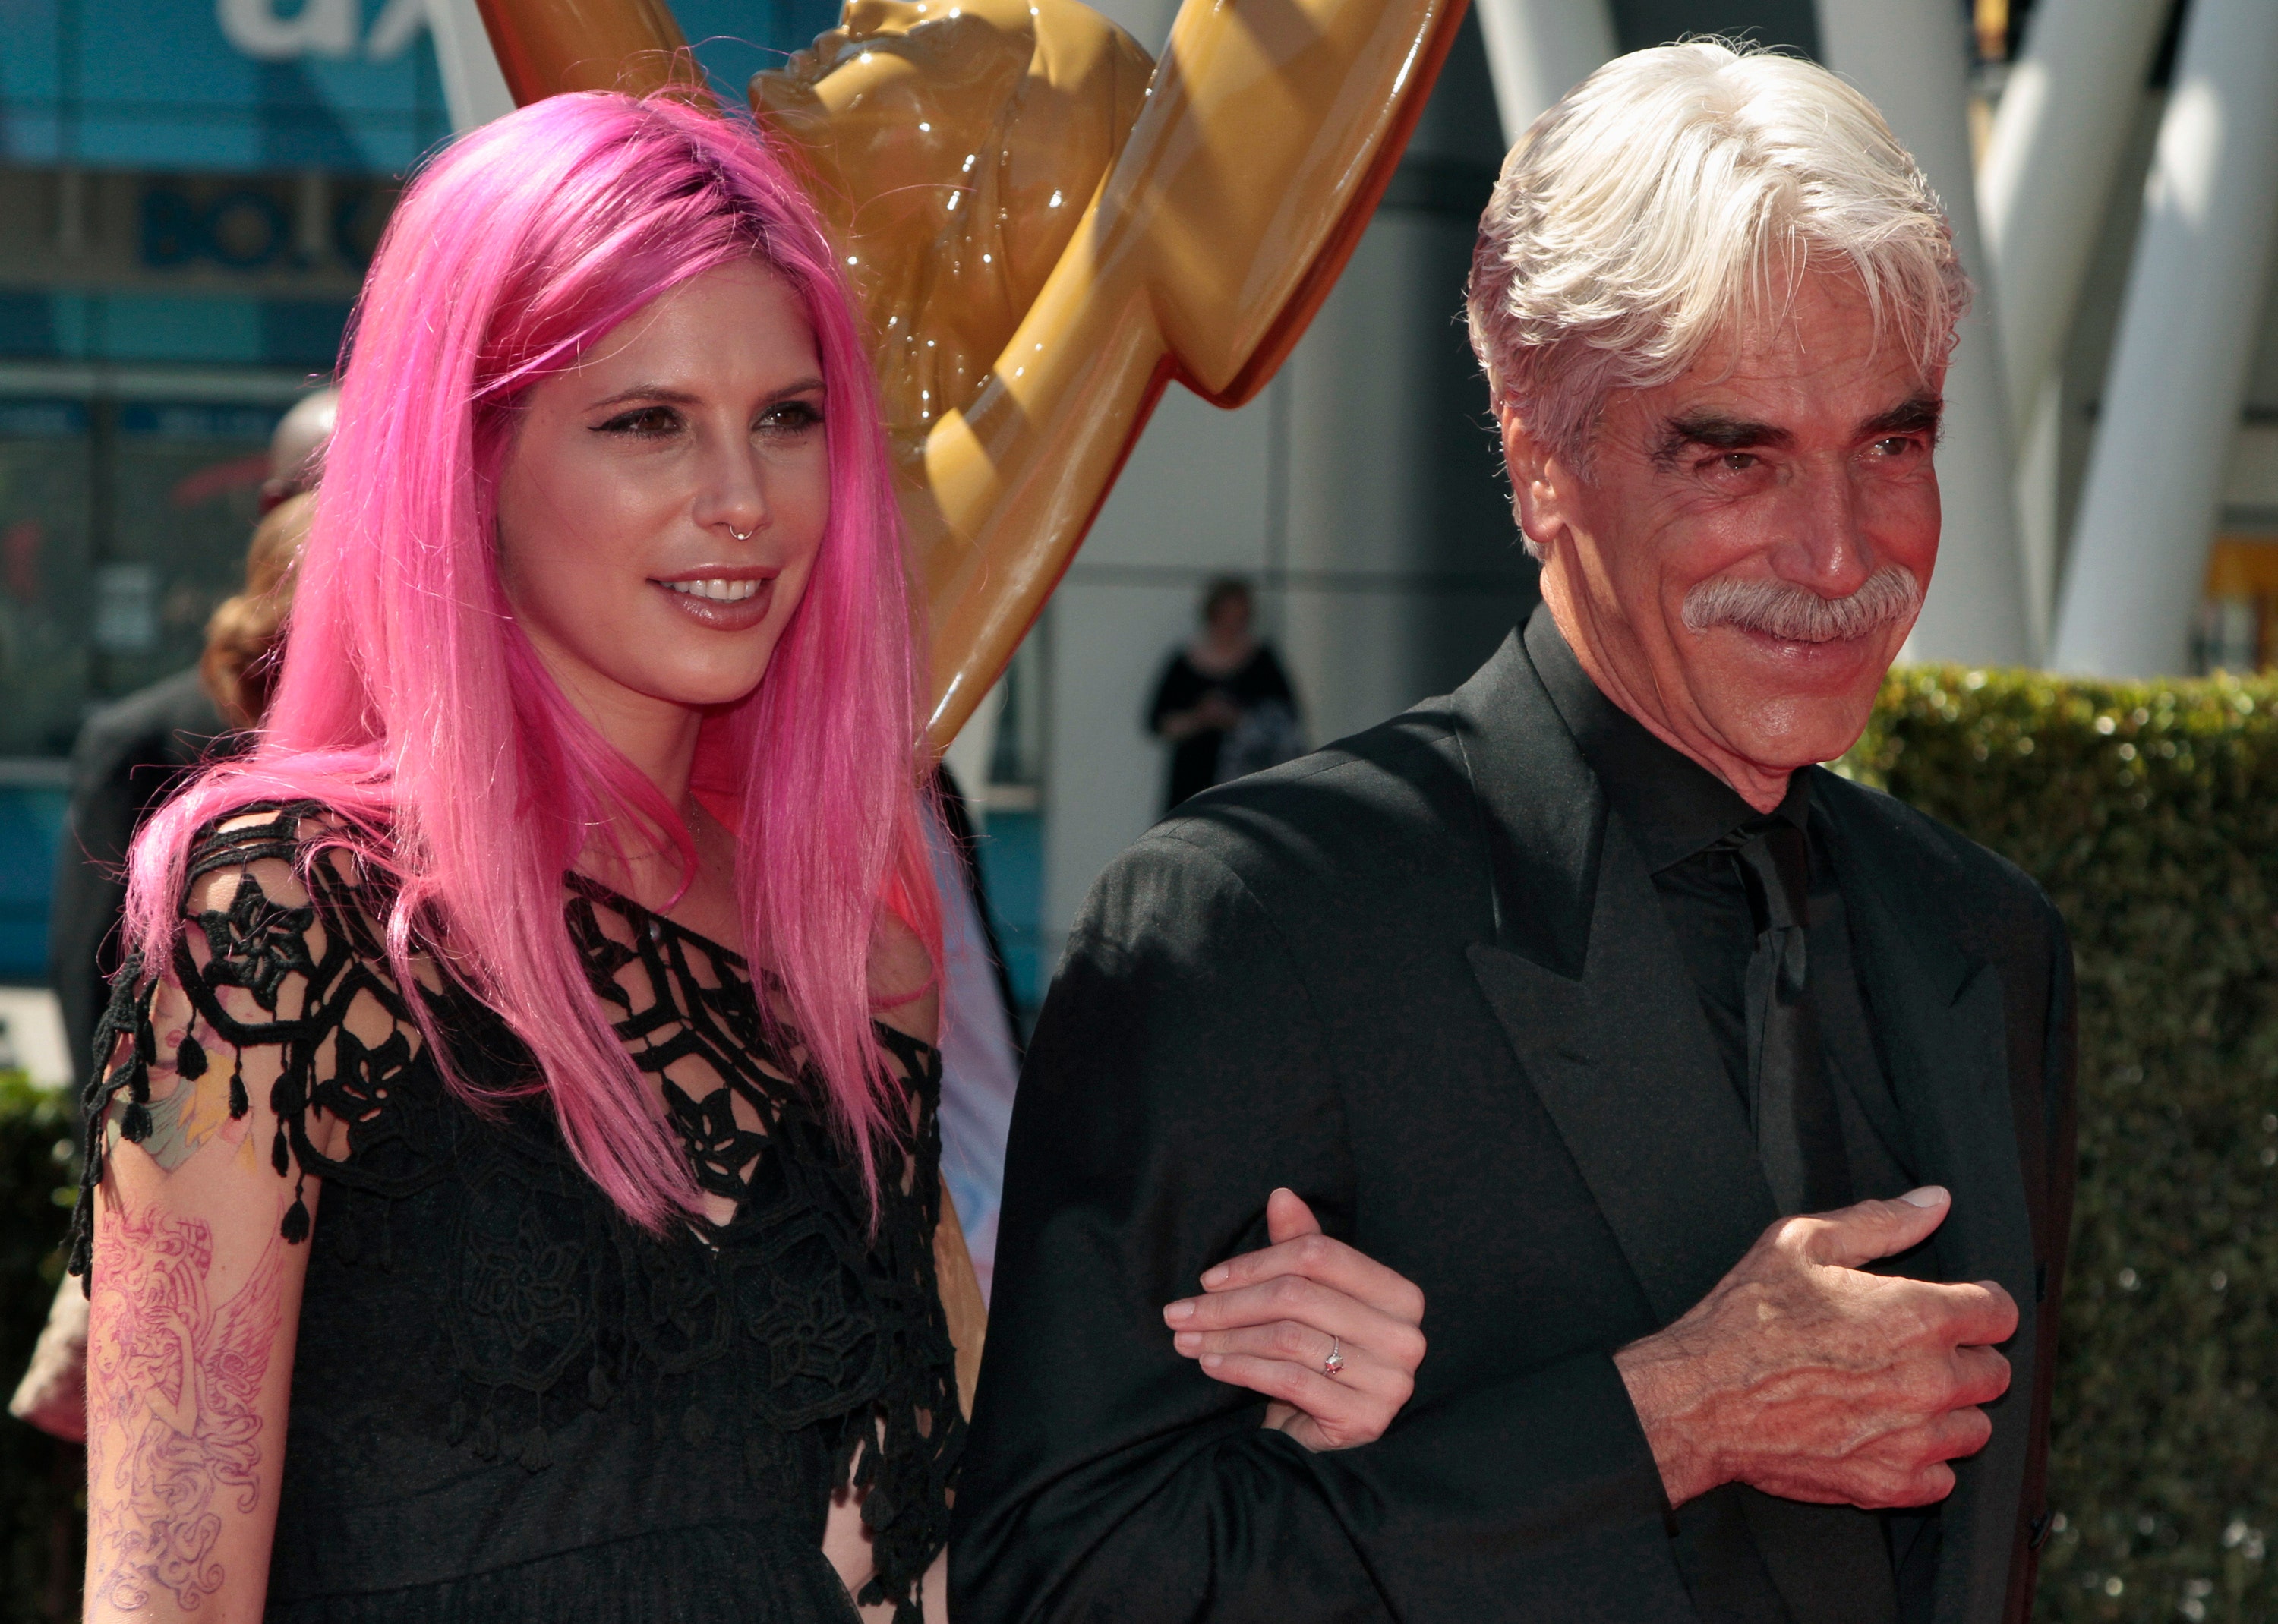 Sam Elliot S Daughter Pictures to Pin on Pinterest - PinsDaddy3000 x 2139